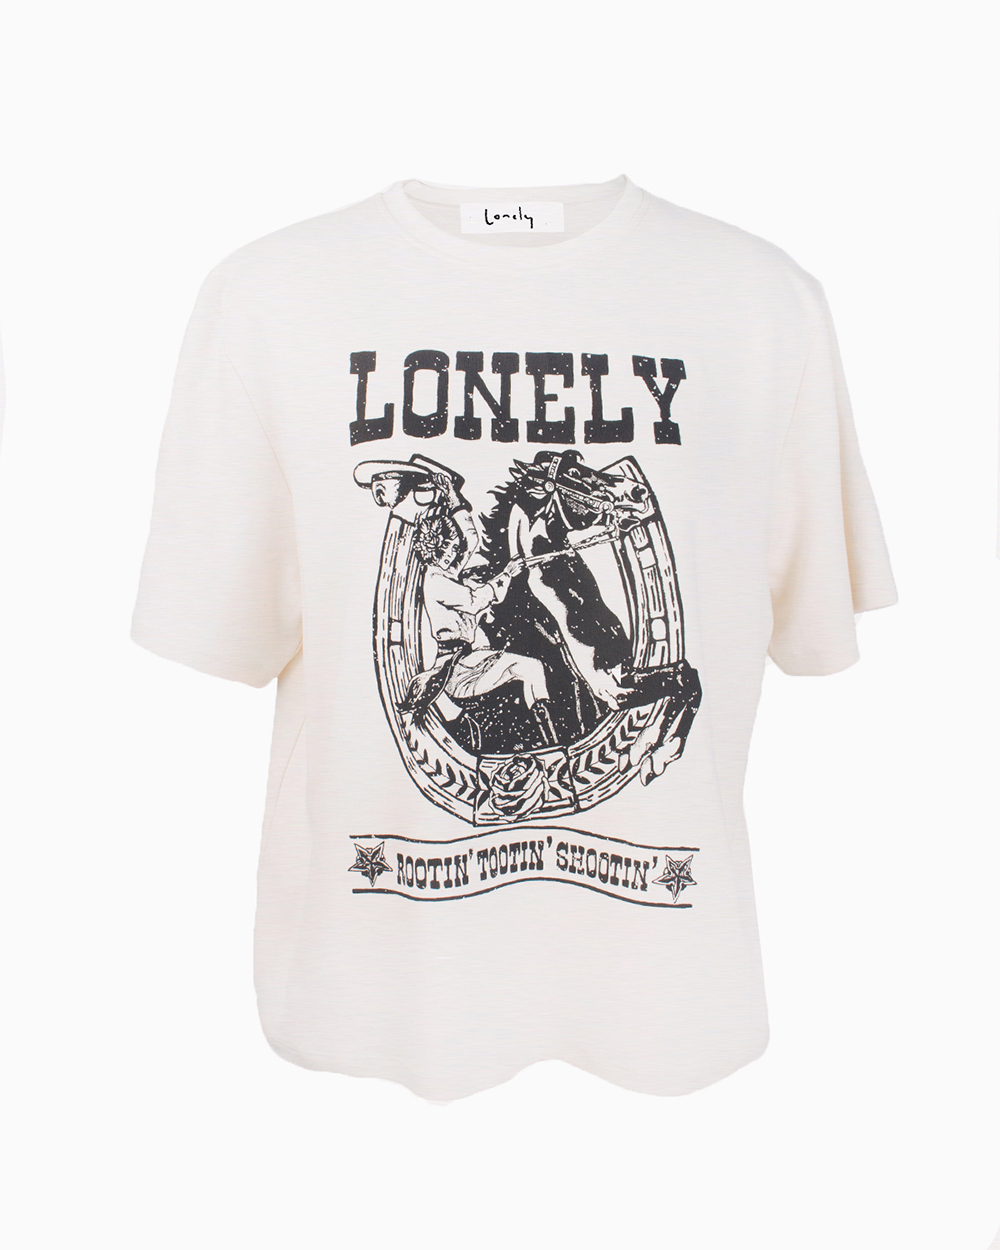 Lady Luck t-shirt, $77 from Lonely